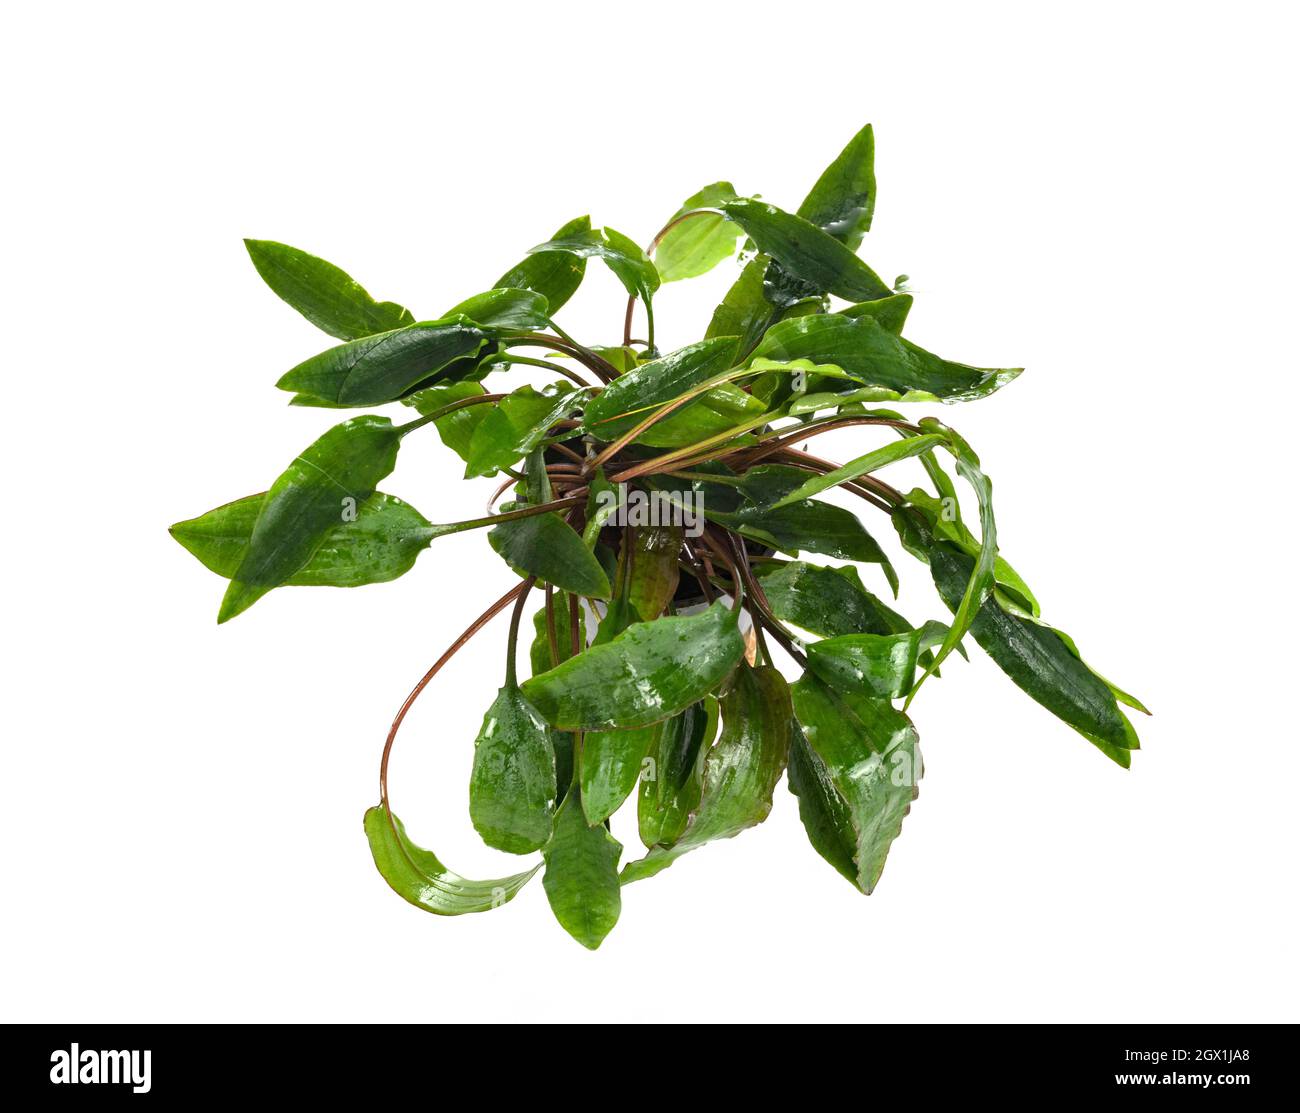 Cryptocoryne affinis in front of white background Stock Photo